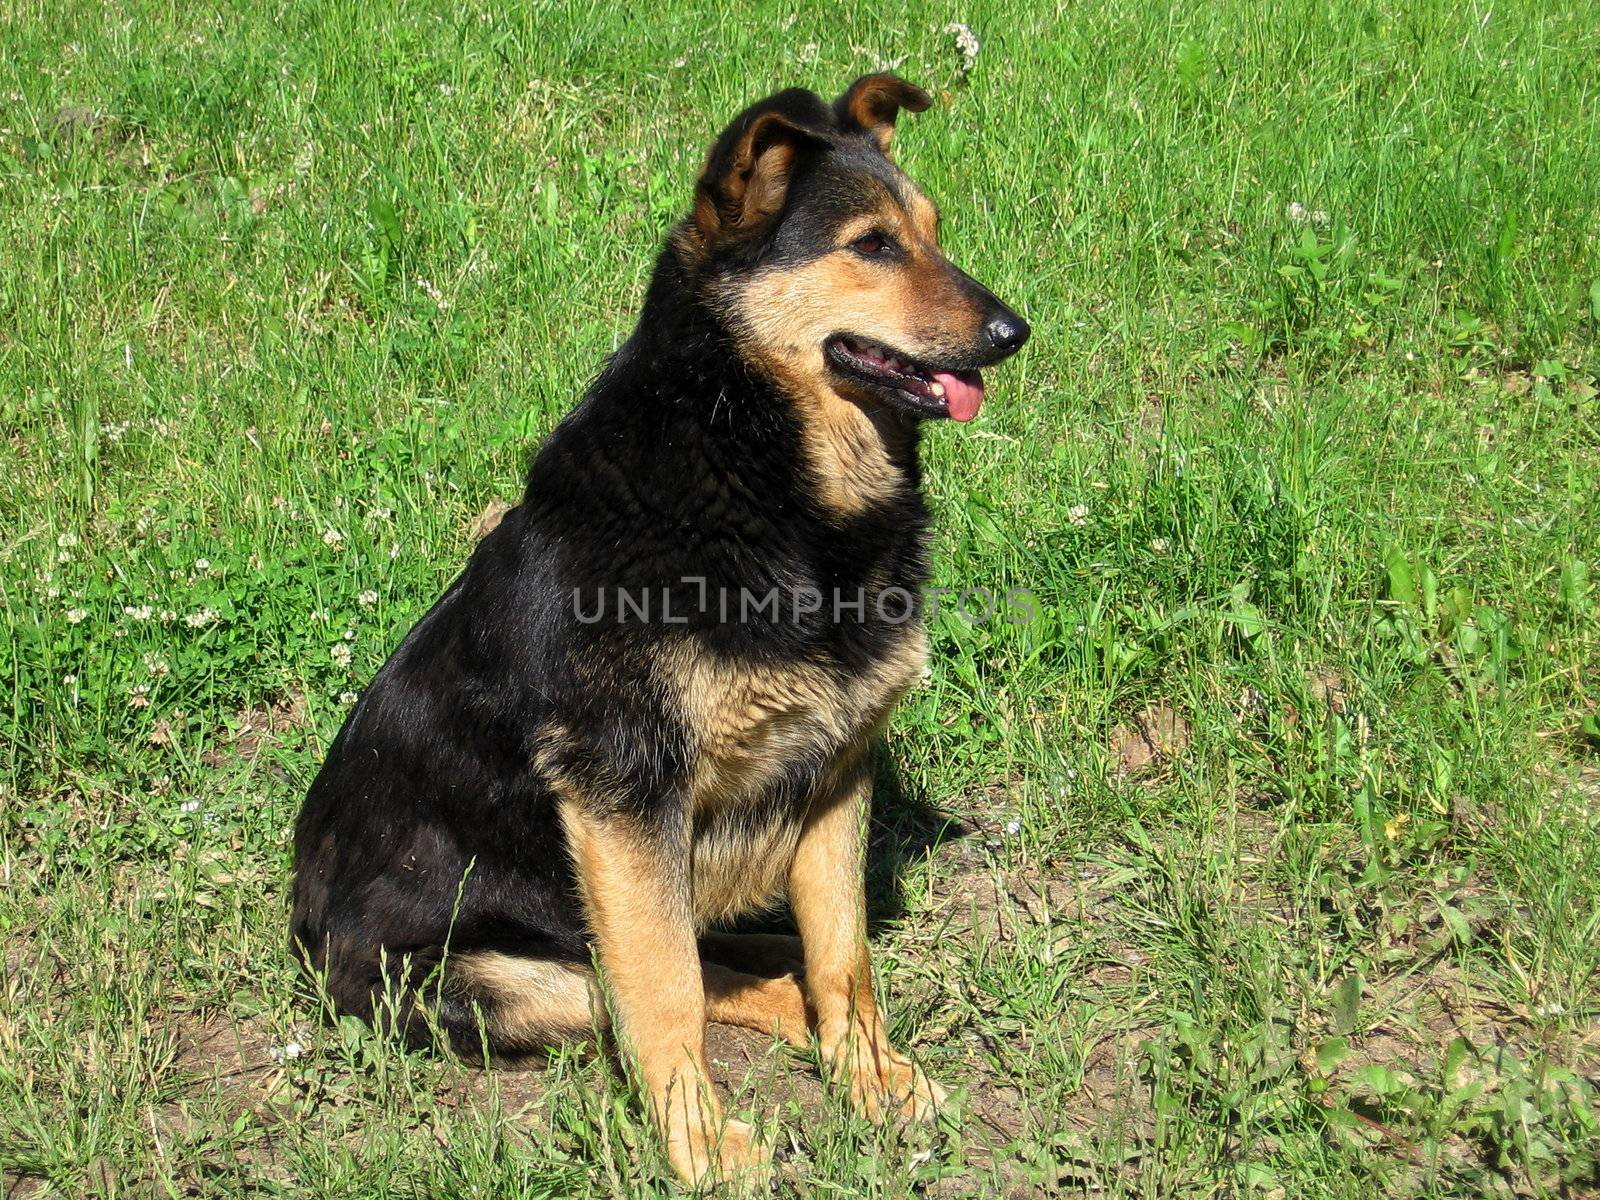 Black guarding dog on a lawn background